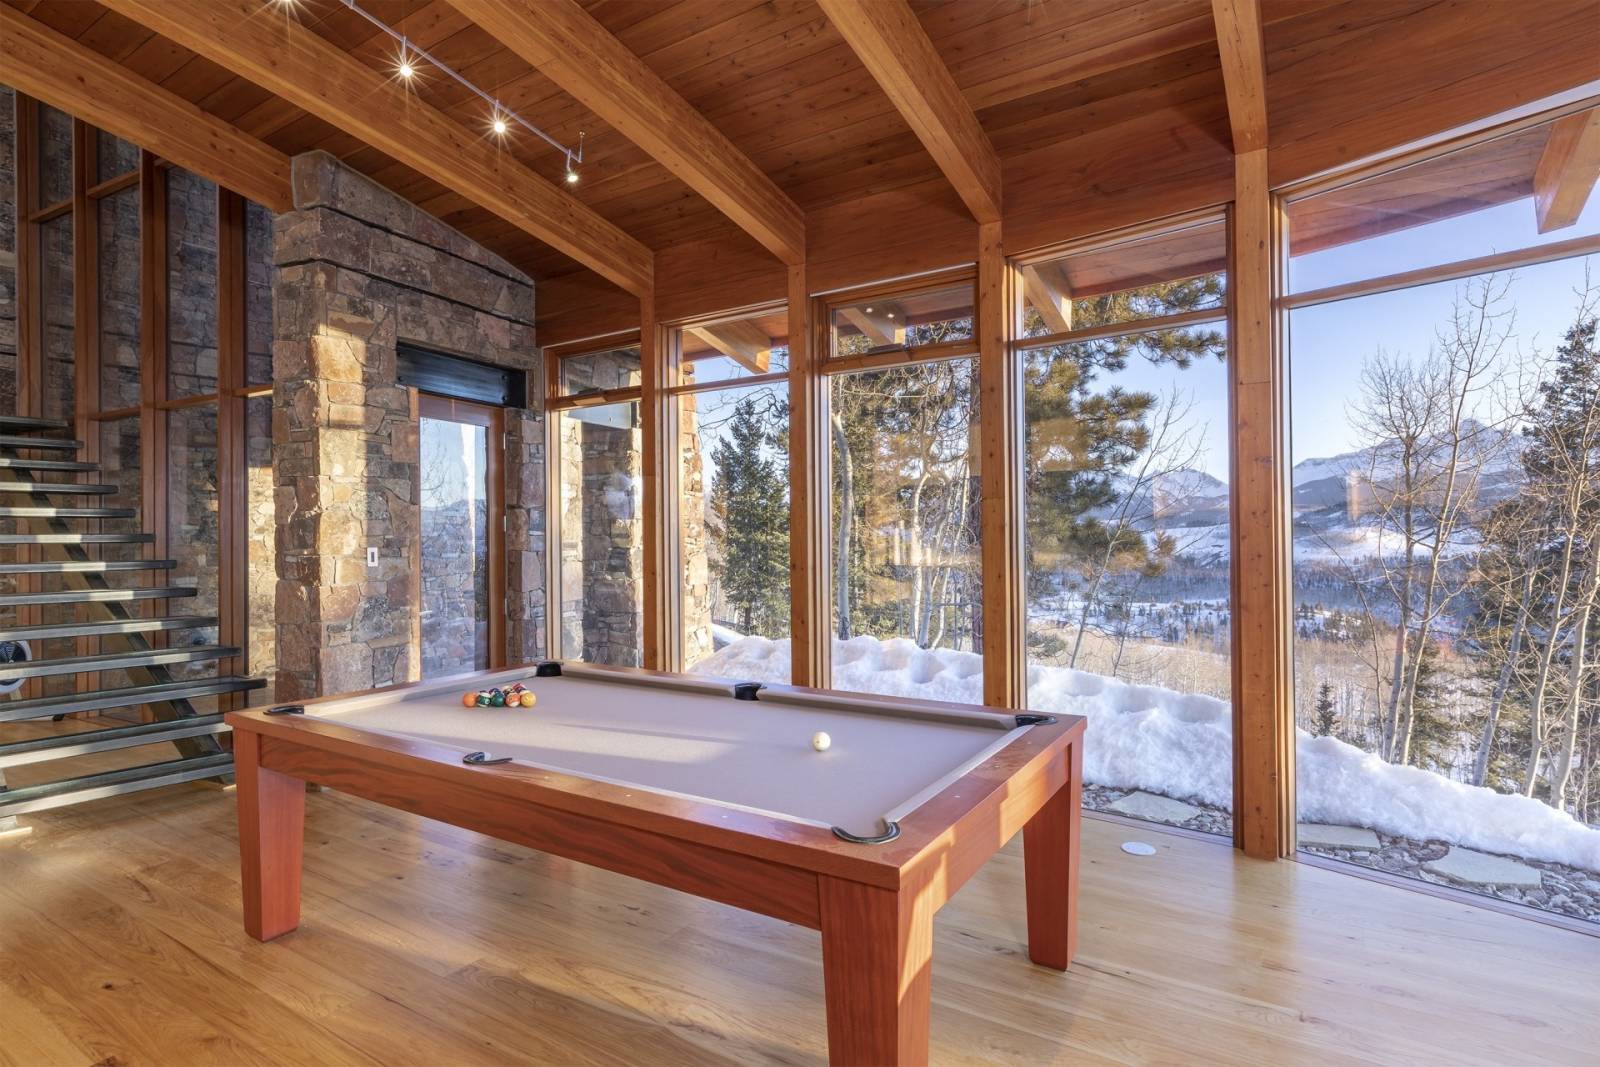 Telluride Vacation Rentals, PaGomo* - The lowest level of the home offers a game room with pool table and theatre.